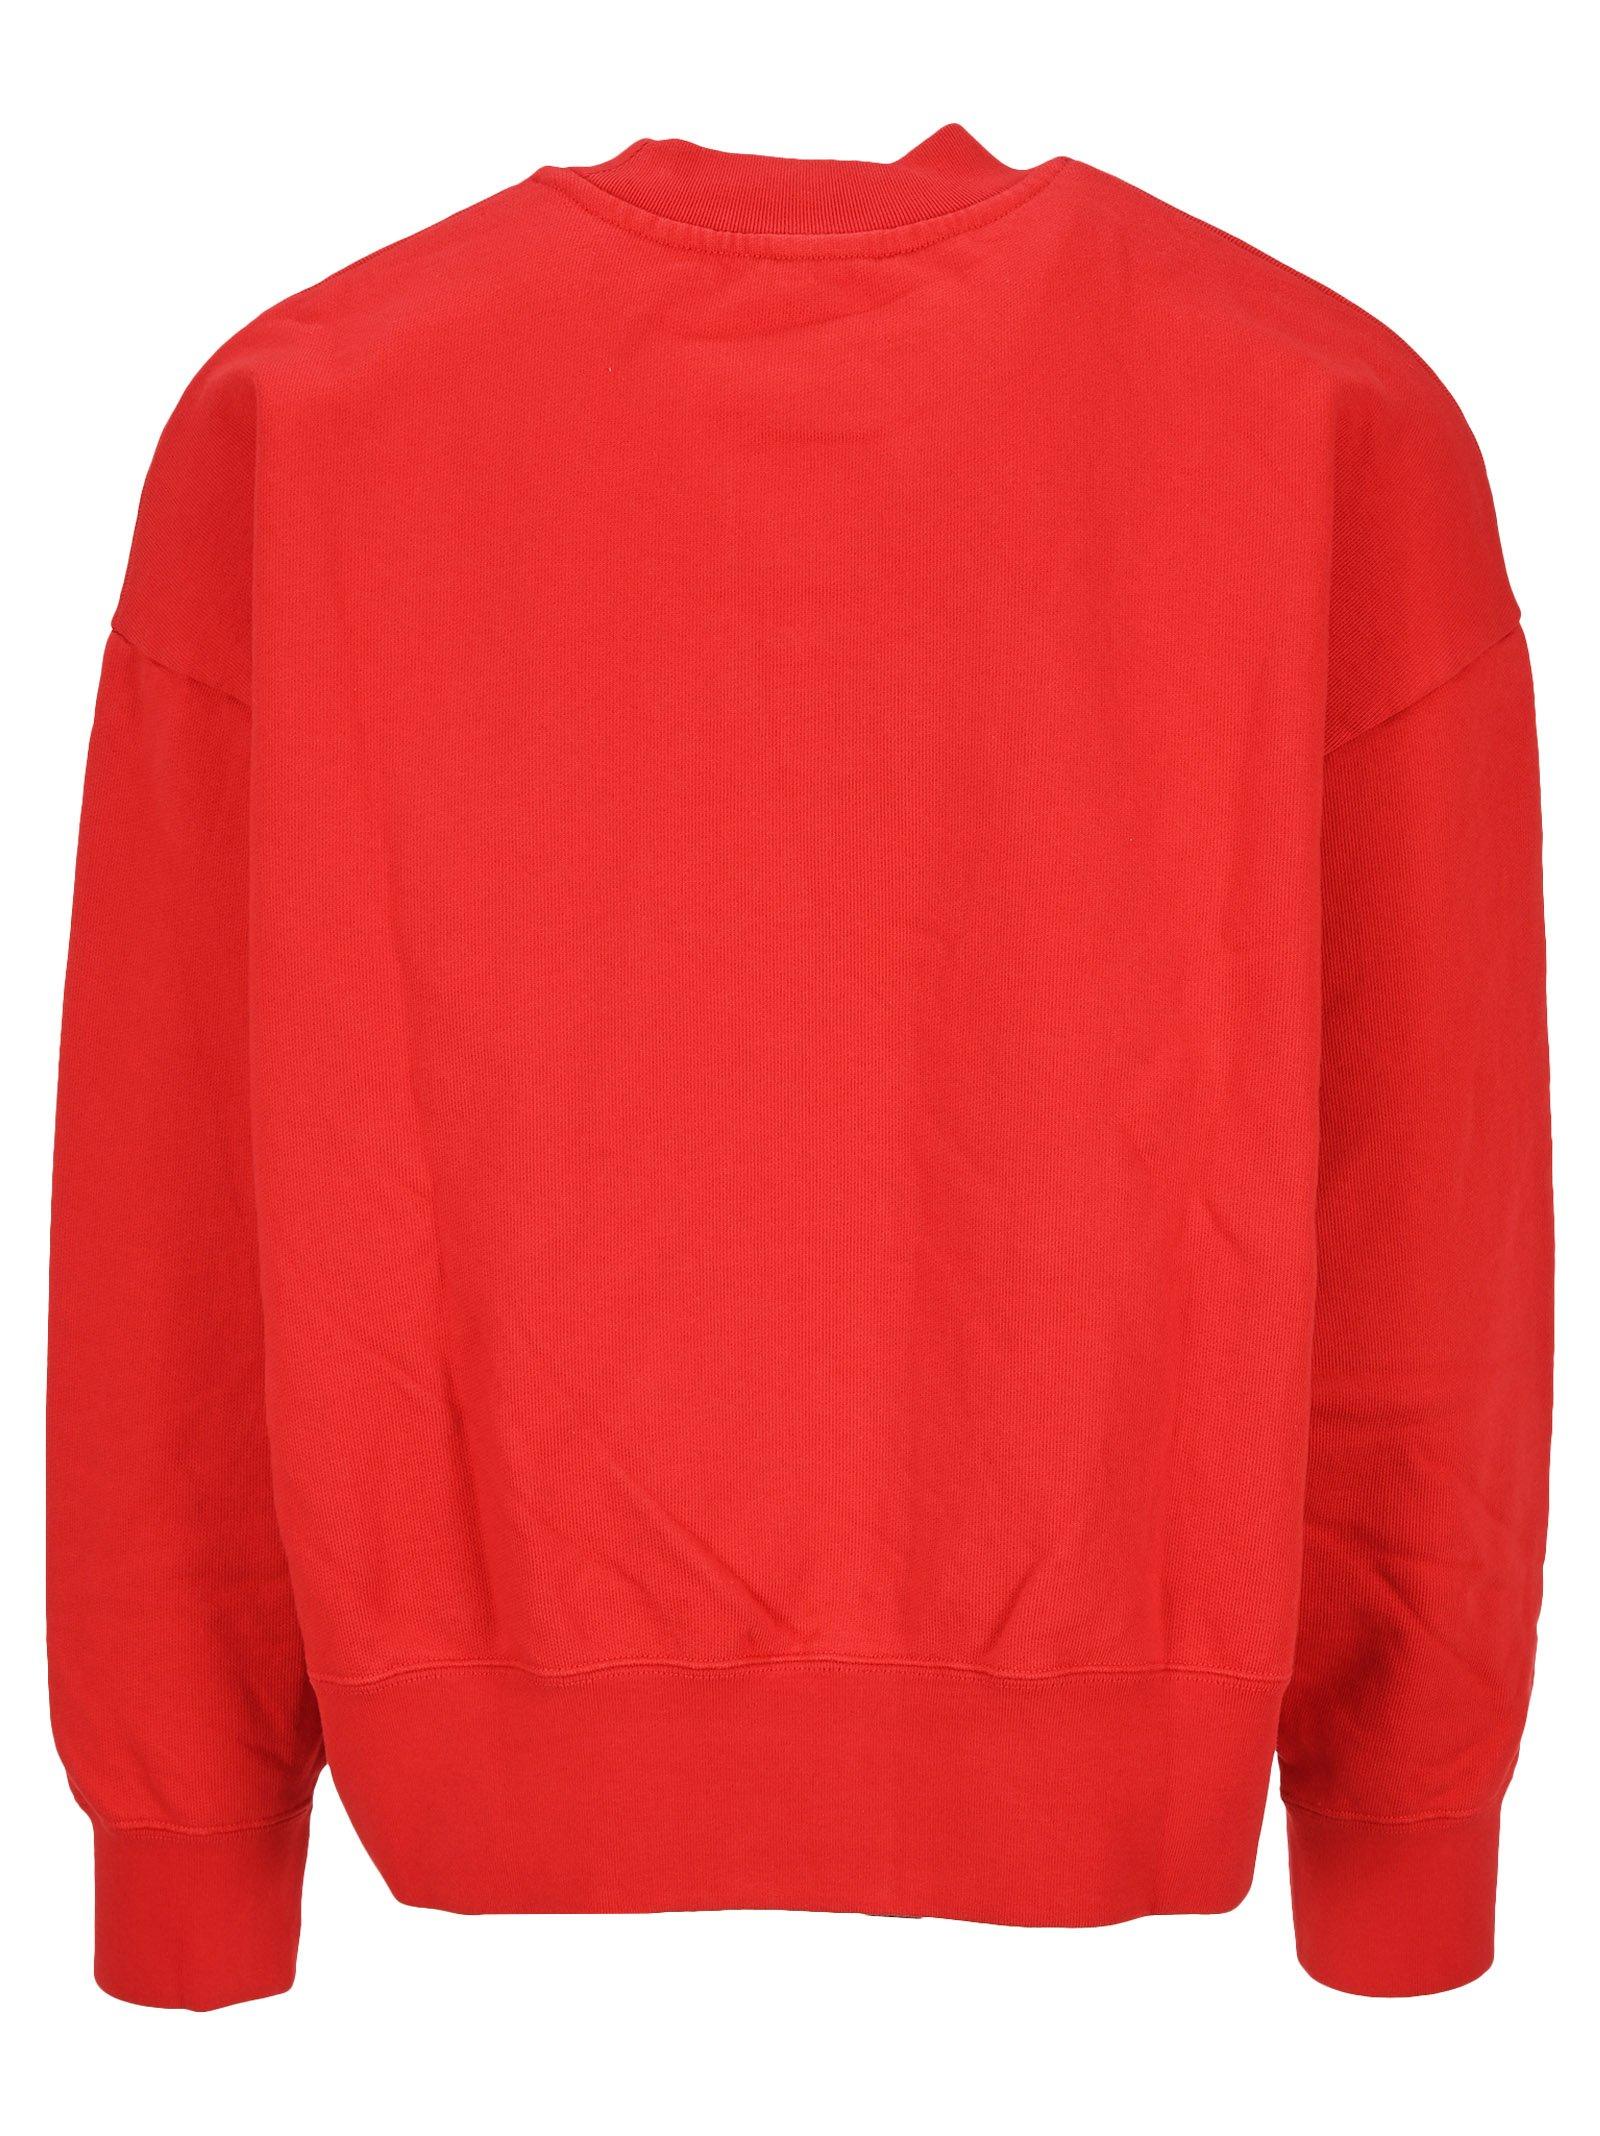 Palm Angels Cotton Desert Logo Crewneck Pullover in Red for Men - Lyst